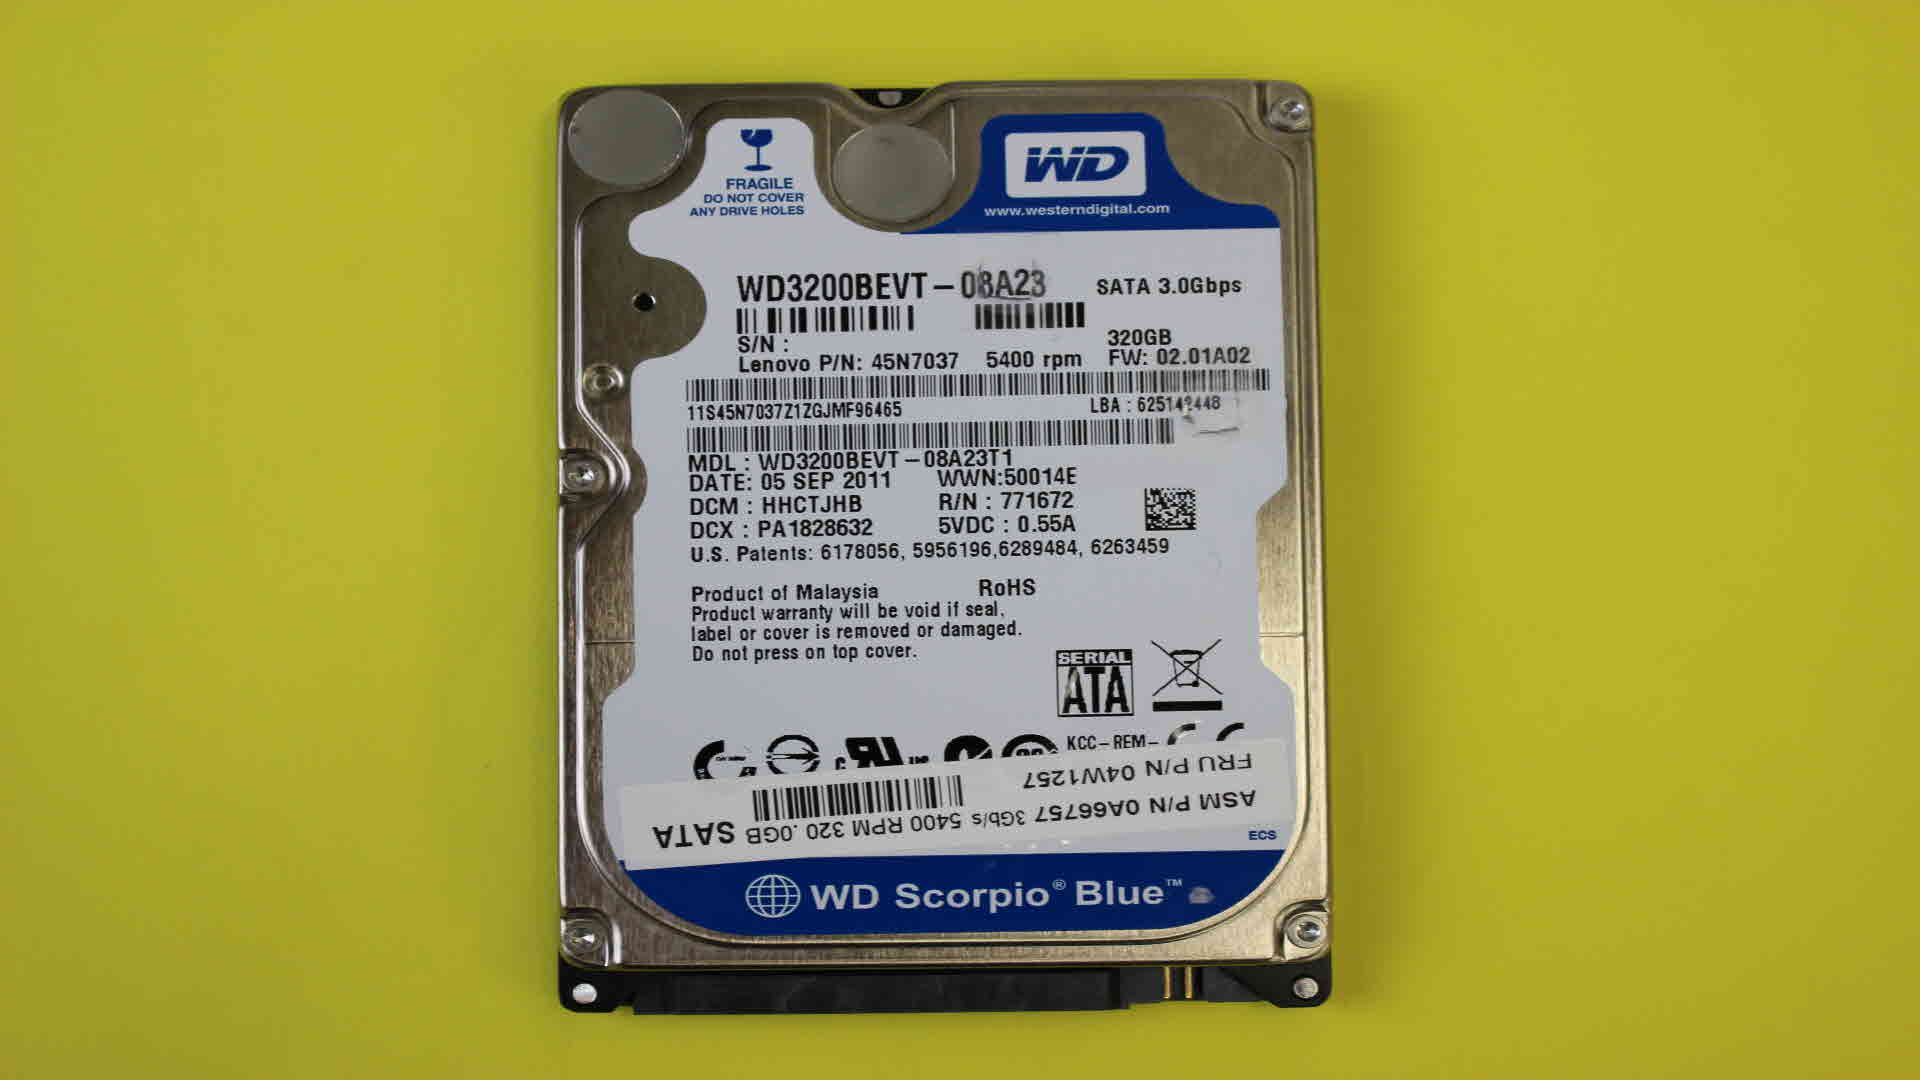 wd3200bevt-08a23t1-recovery